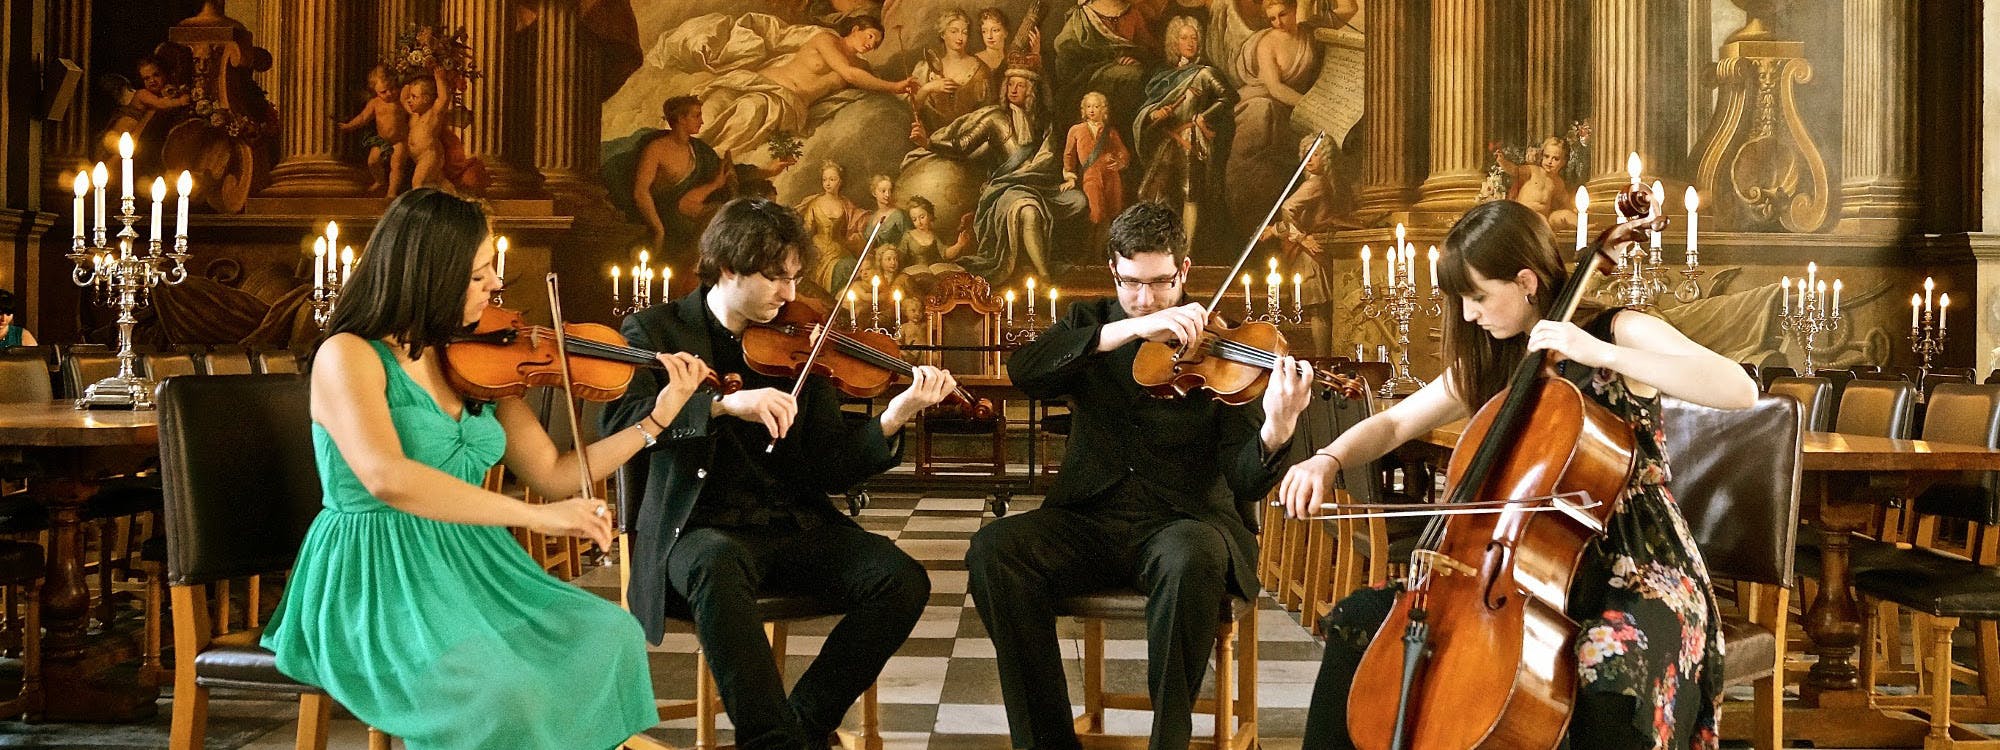 Quartet Volute at the Painted Hall, Greenwich